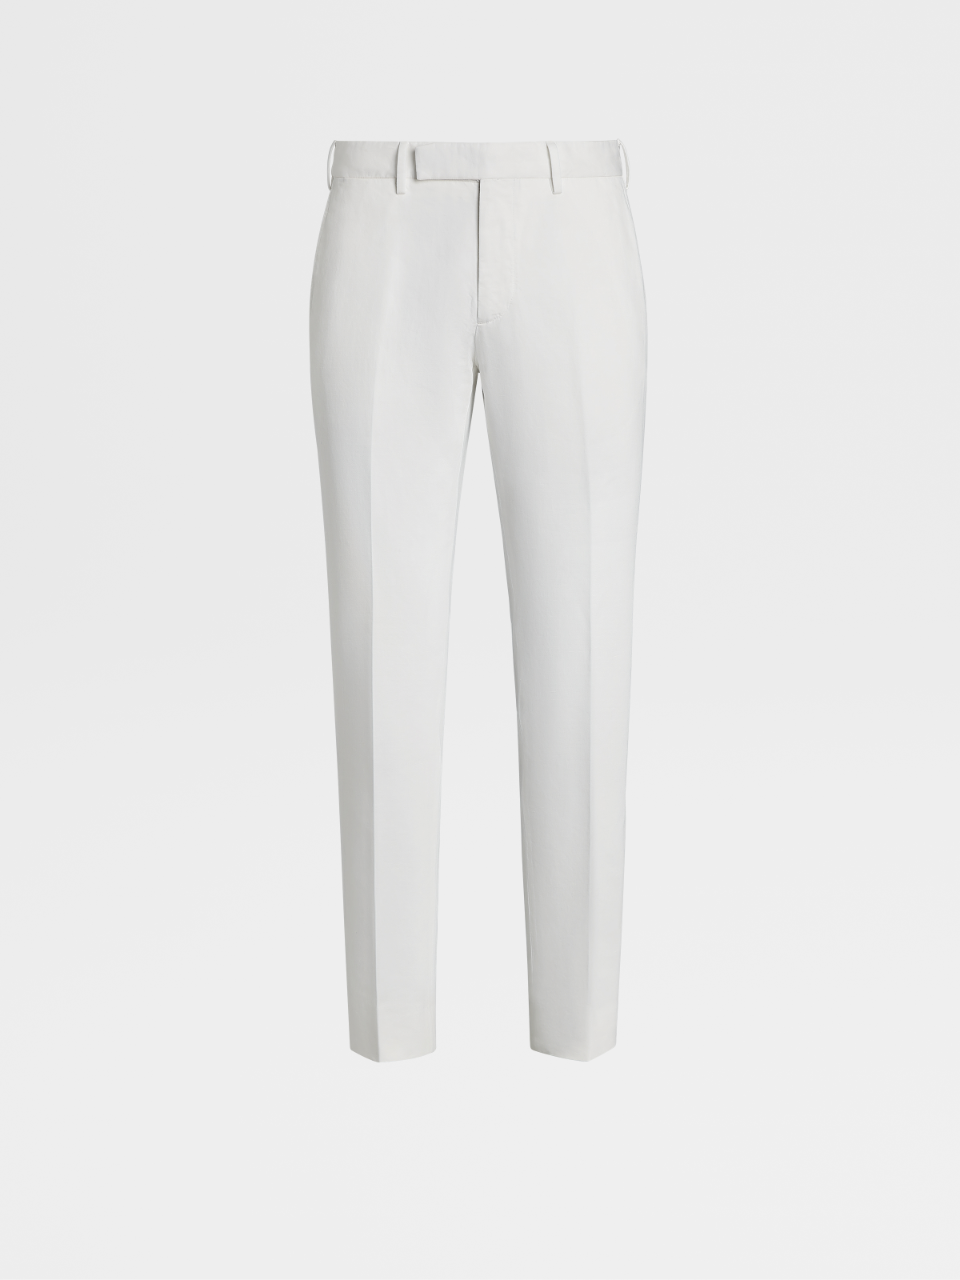 Cotton and Linen Summer Chino Flat Front Trousers